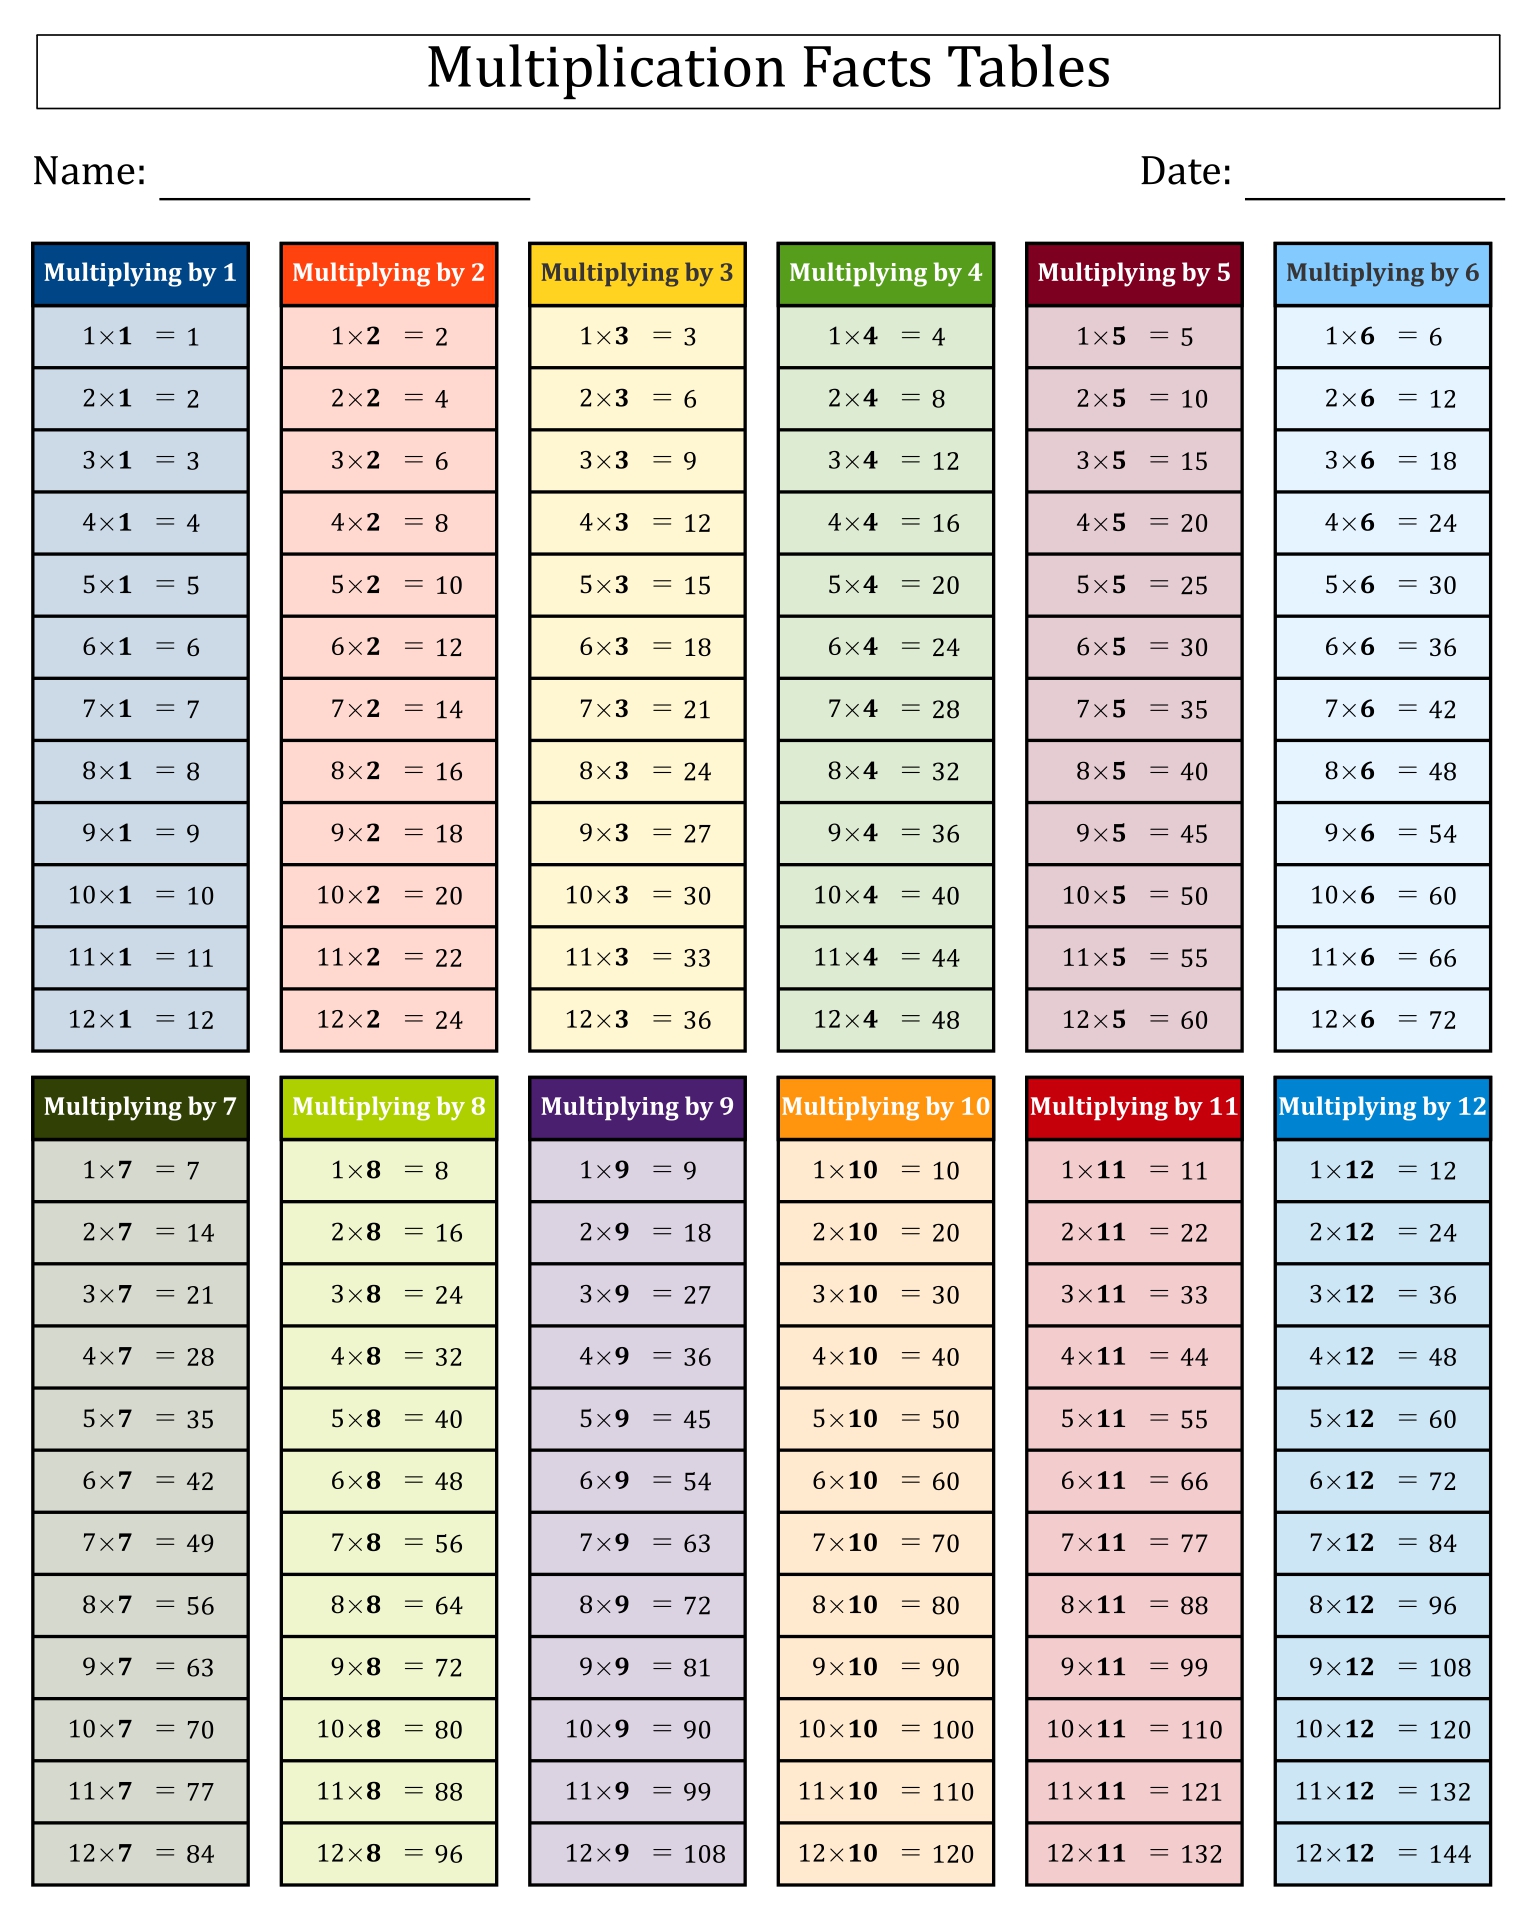 7-best-images-of-printable-multiplication-tables-0-12-multiplication-chart-1-12-printable